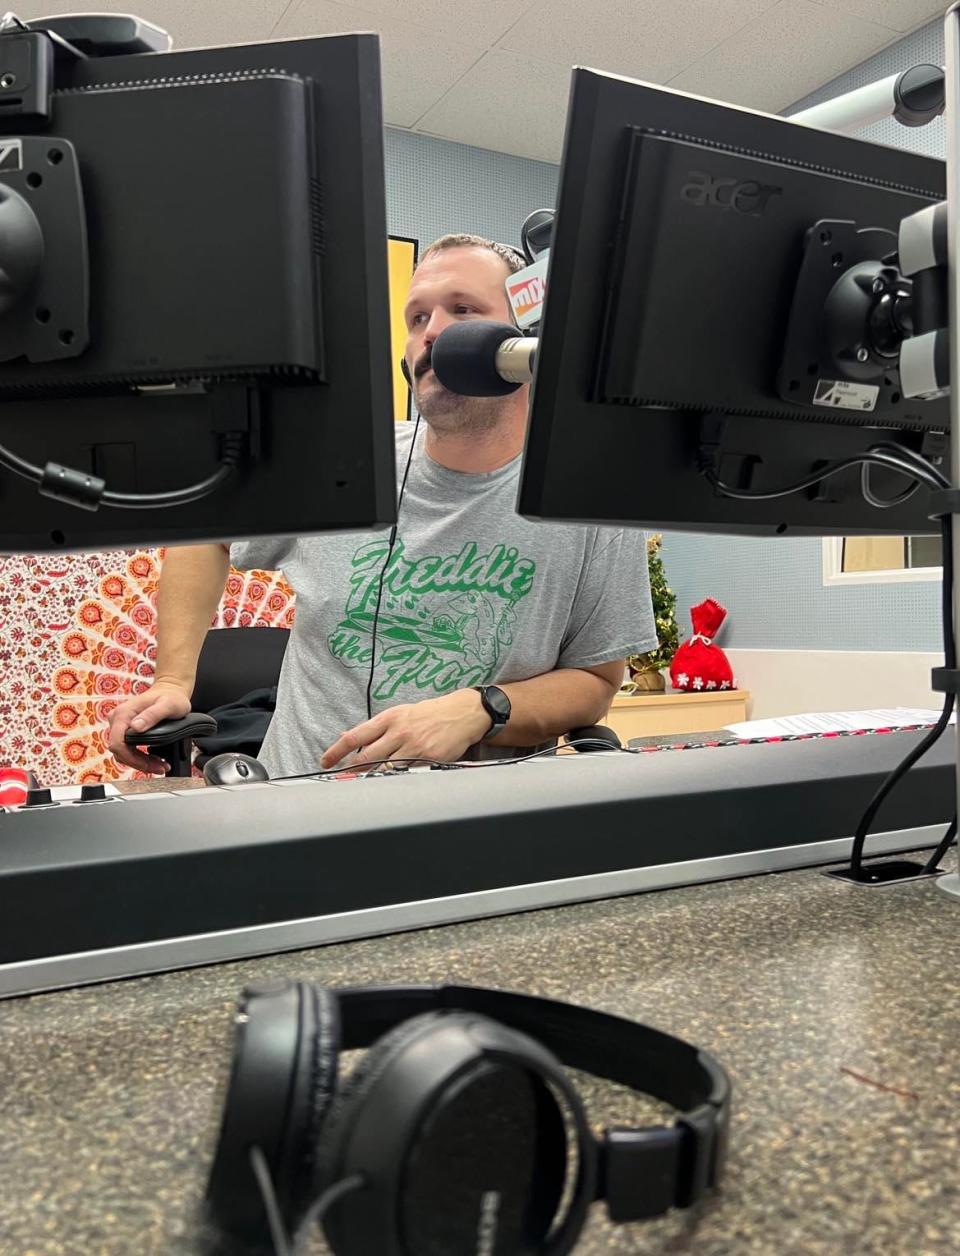 Matt Fantone, who hosts a morning show on Mix 94.1 FM in Canton, blends local content with national pop culture news while also interviewing local guests.